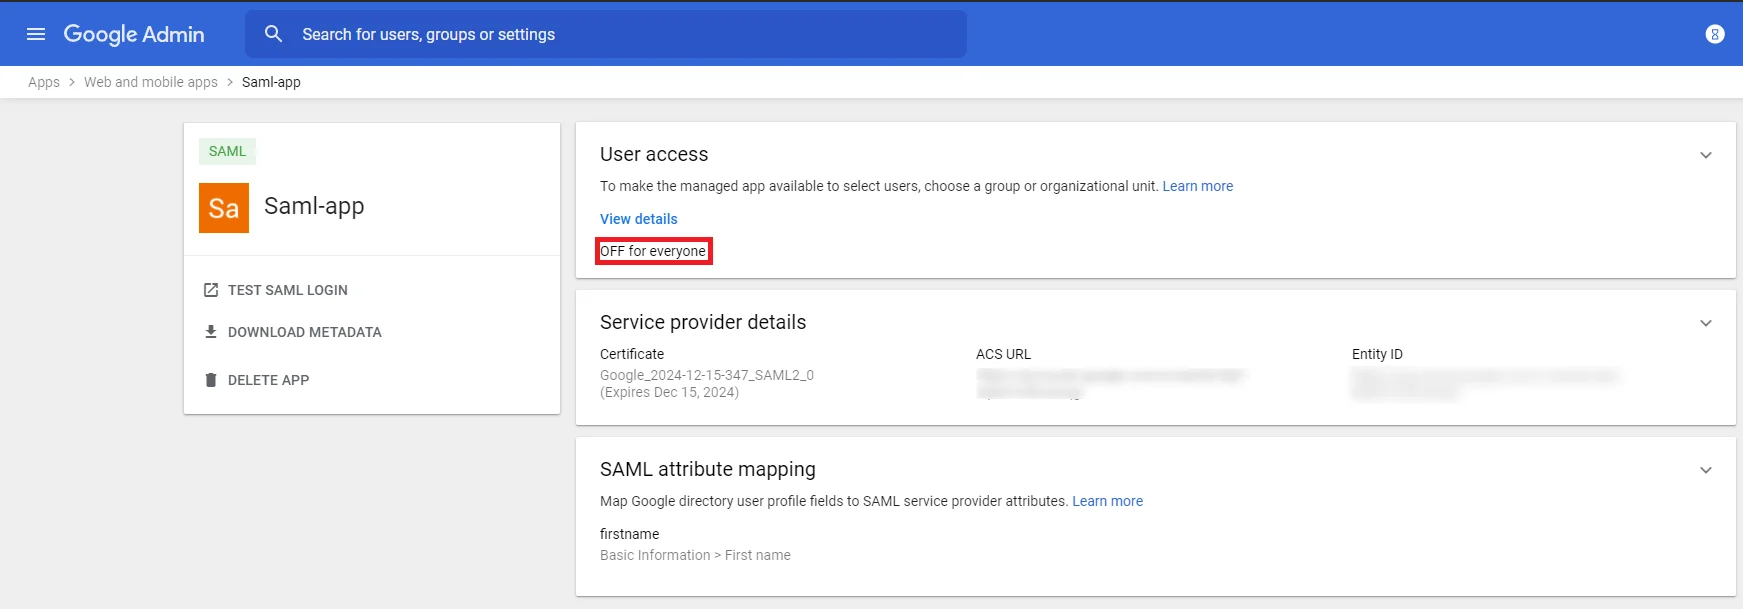 Umbraco Single Sign-On (SSO) using Google Apps as IDP - Turn-On go to SAML Apps